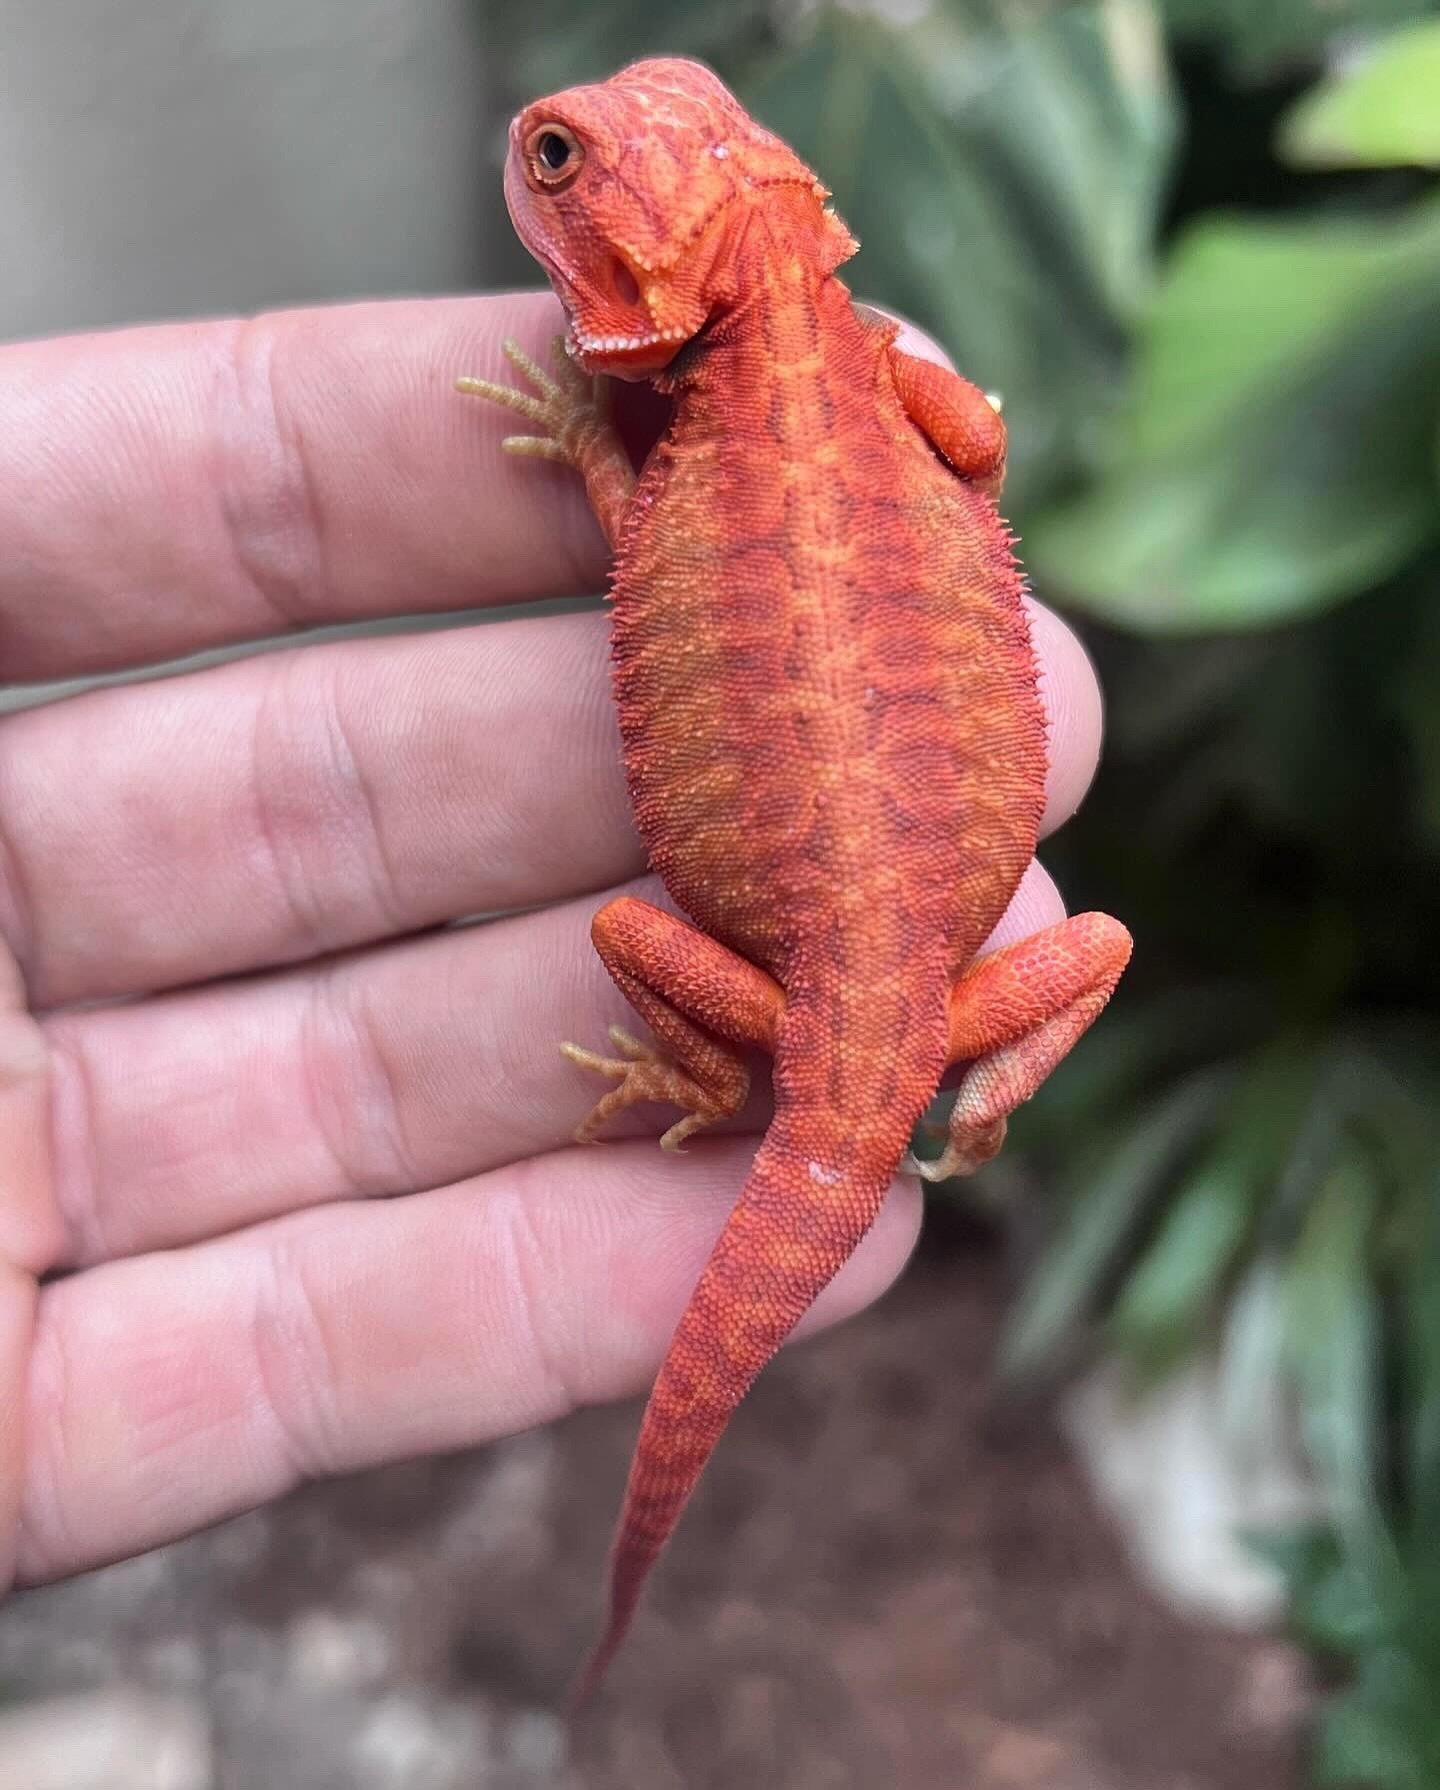 Which Chameleon Lovers out there also love our little Australian Bearded Dragon Friends!?!?

Well we love them and with that love we are pleased to present our most Red Dragons produced too date. Not only are these guys just visually stunning but the